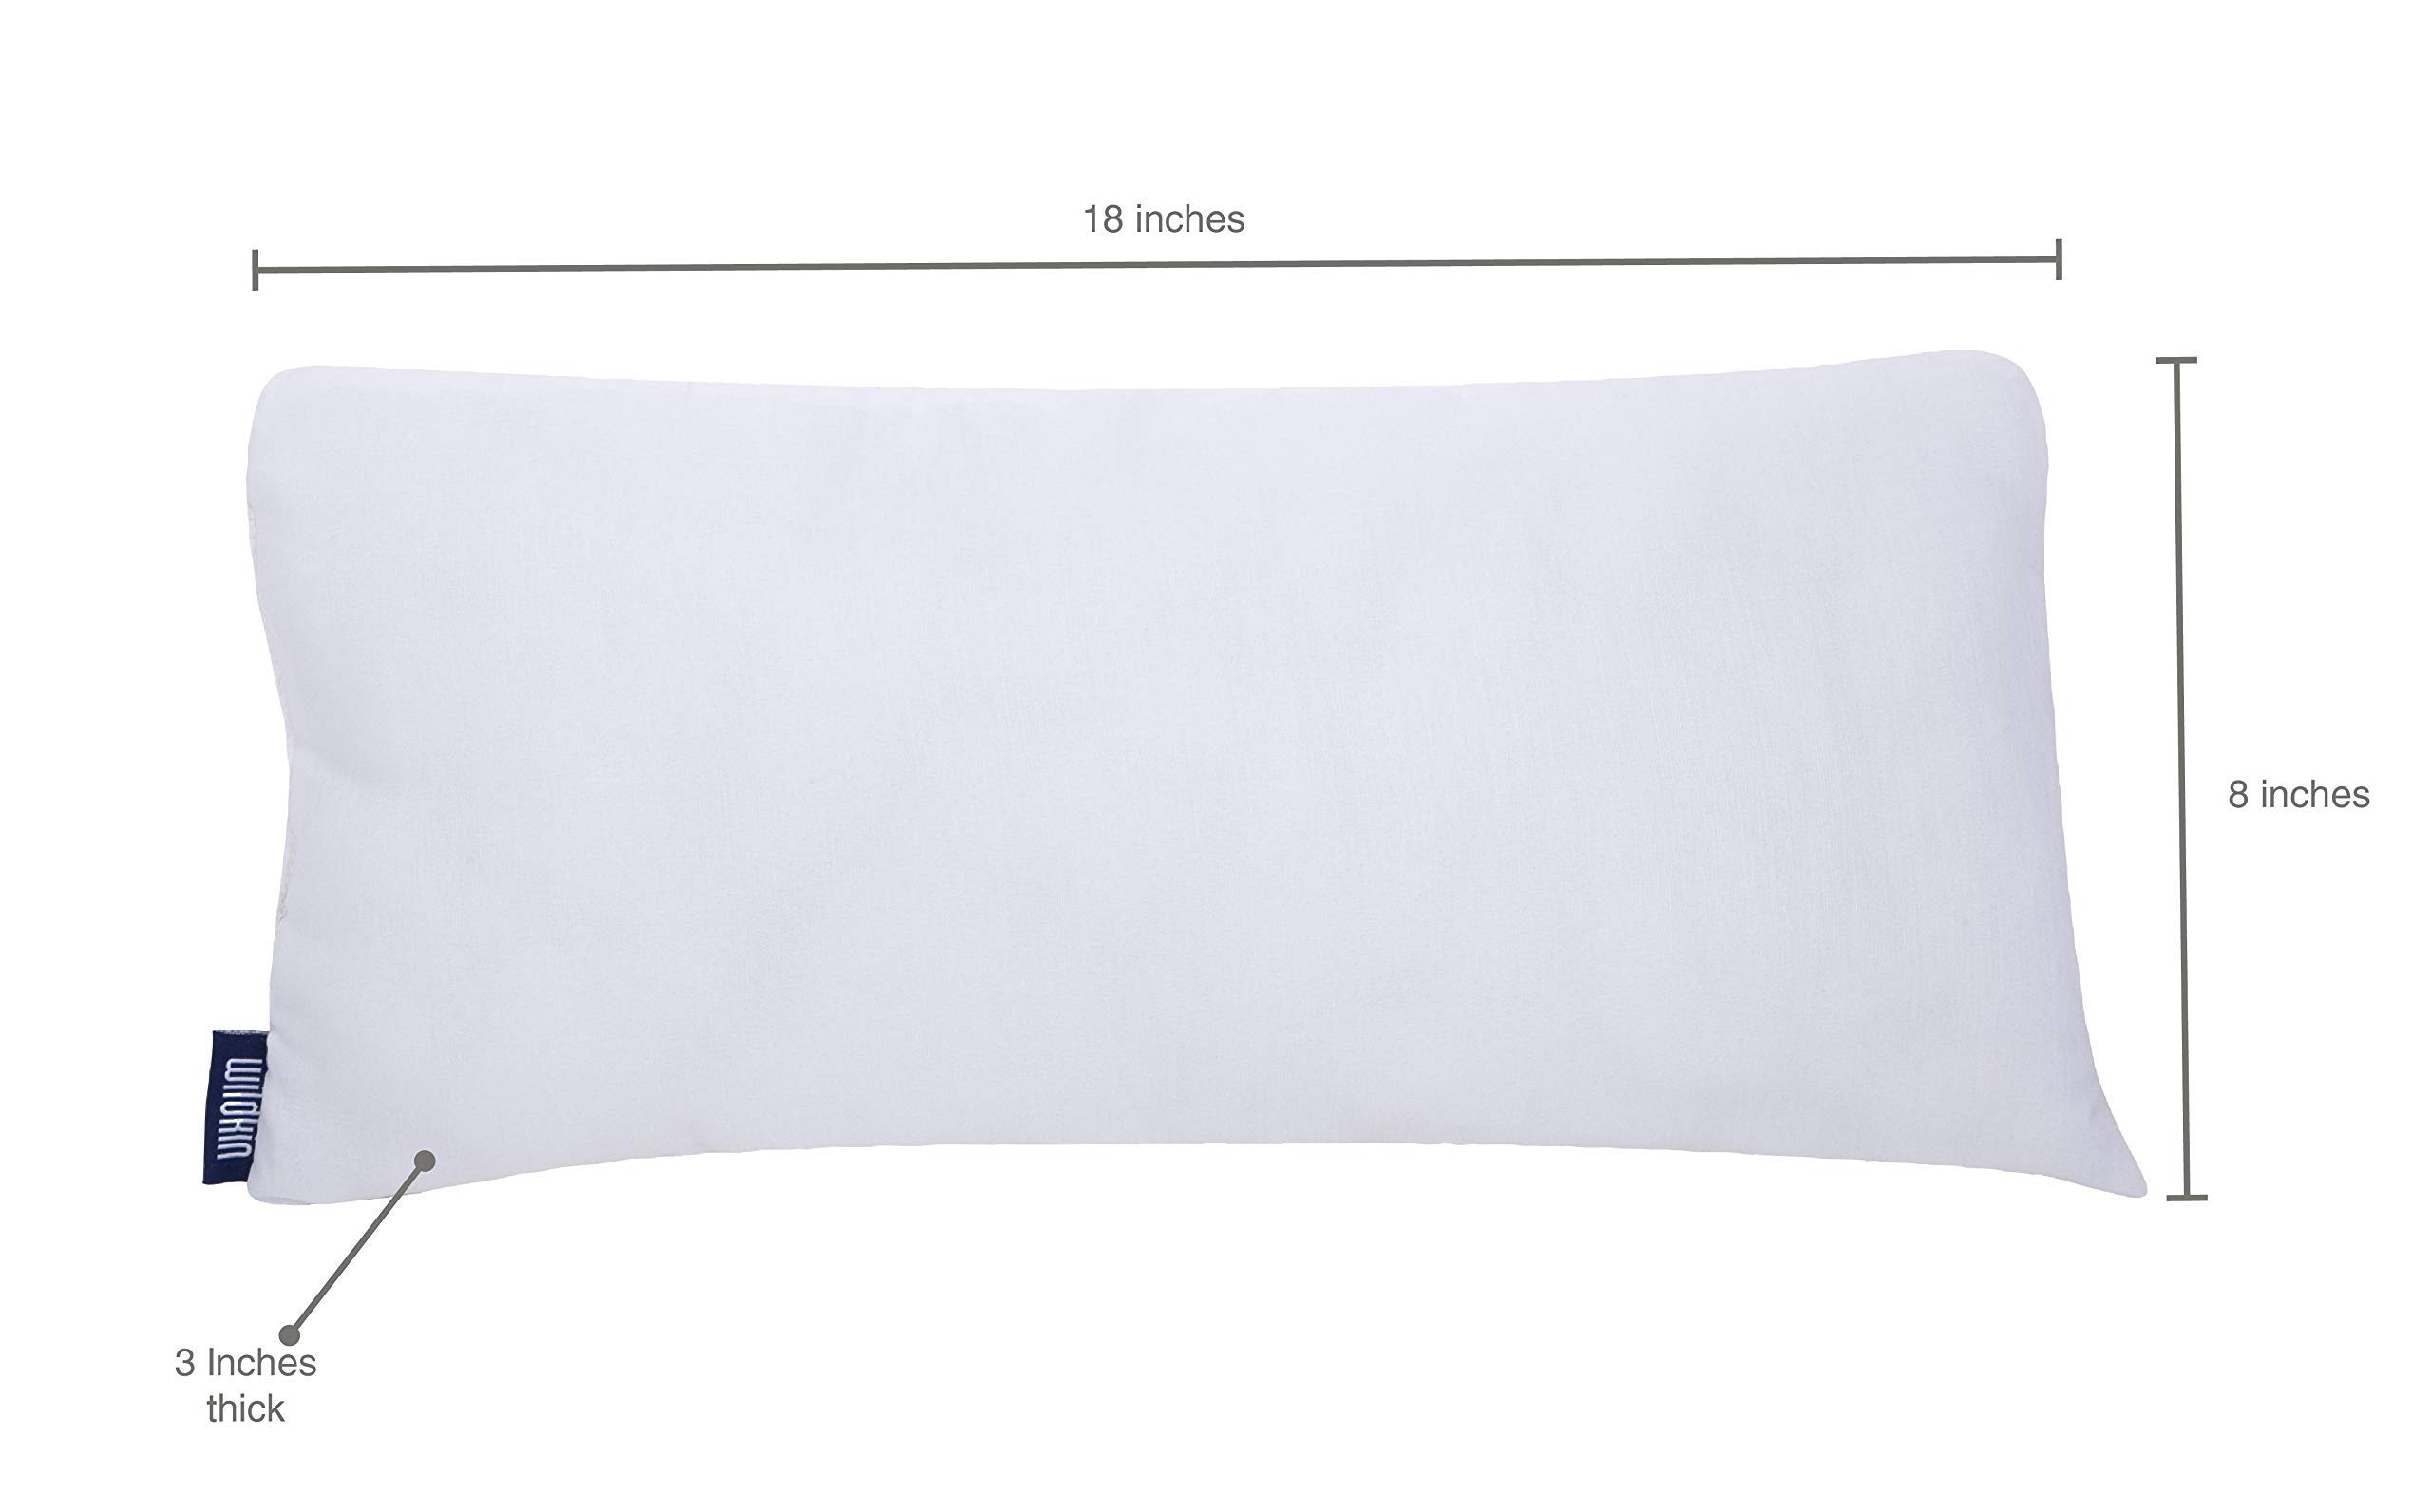 Wildkin Kids Nap Mat Pillow for Boys and Girls, Perfect Removable Replacement Pillow, Sized to Fit in Our Microfiber, Cotton & Original Nap Mats, Super Soft Cotton Blend Fill, BPA-free (White)